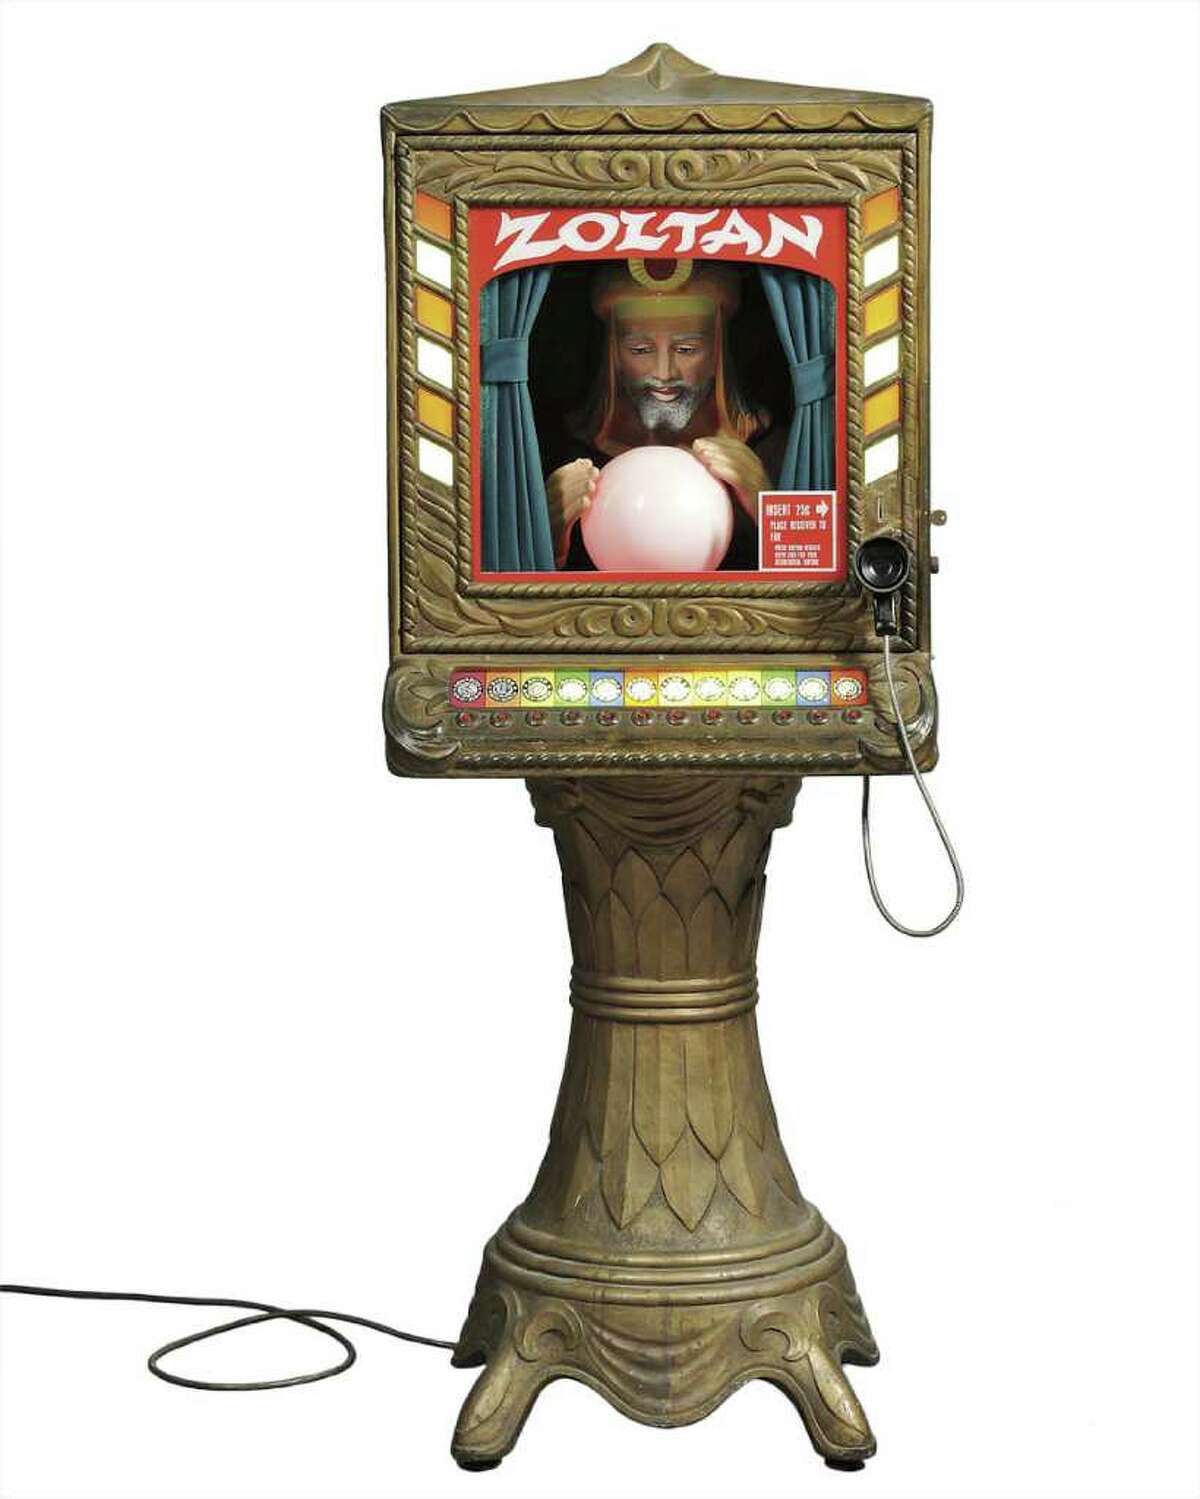 This is Zoltan, the coin-operated fortune teller made of fiberglass by Prophetron, Inc., in the early 1970s. The fortune was spoken by a voice thatís heard through an earpiece. Skinner, Inc., of Marlborough, Mass., auctioned it for $3,500. (Photo courtesy of Skinner, Inc.)